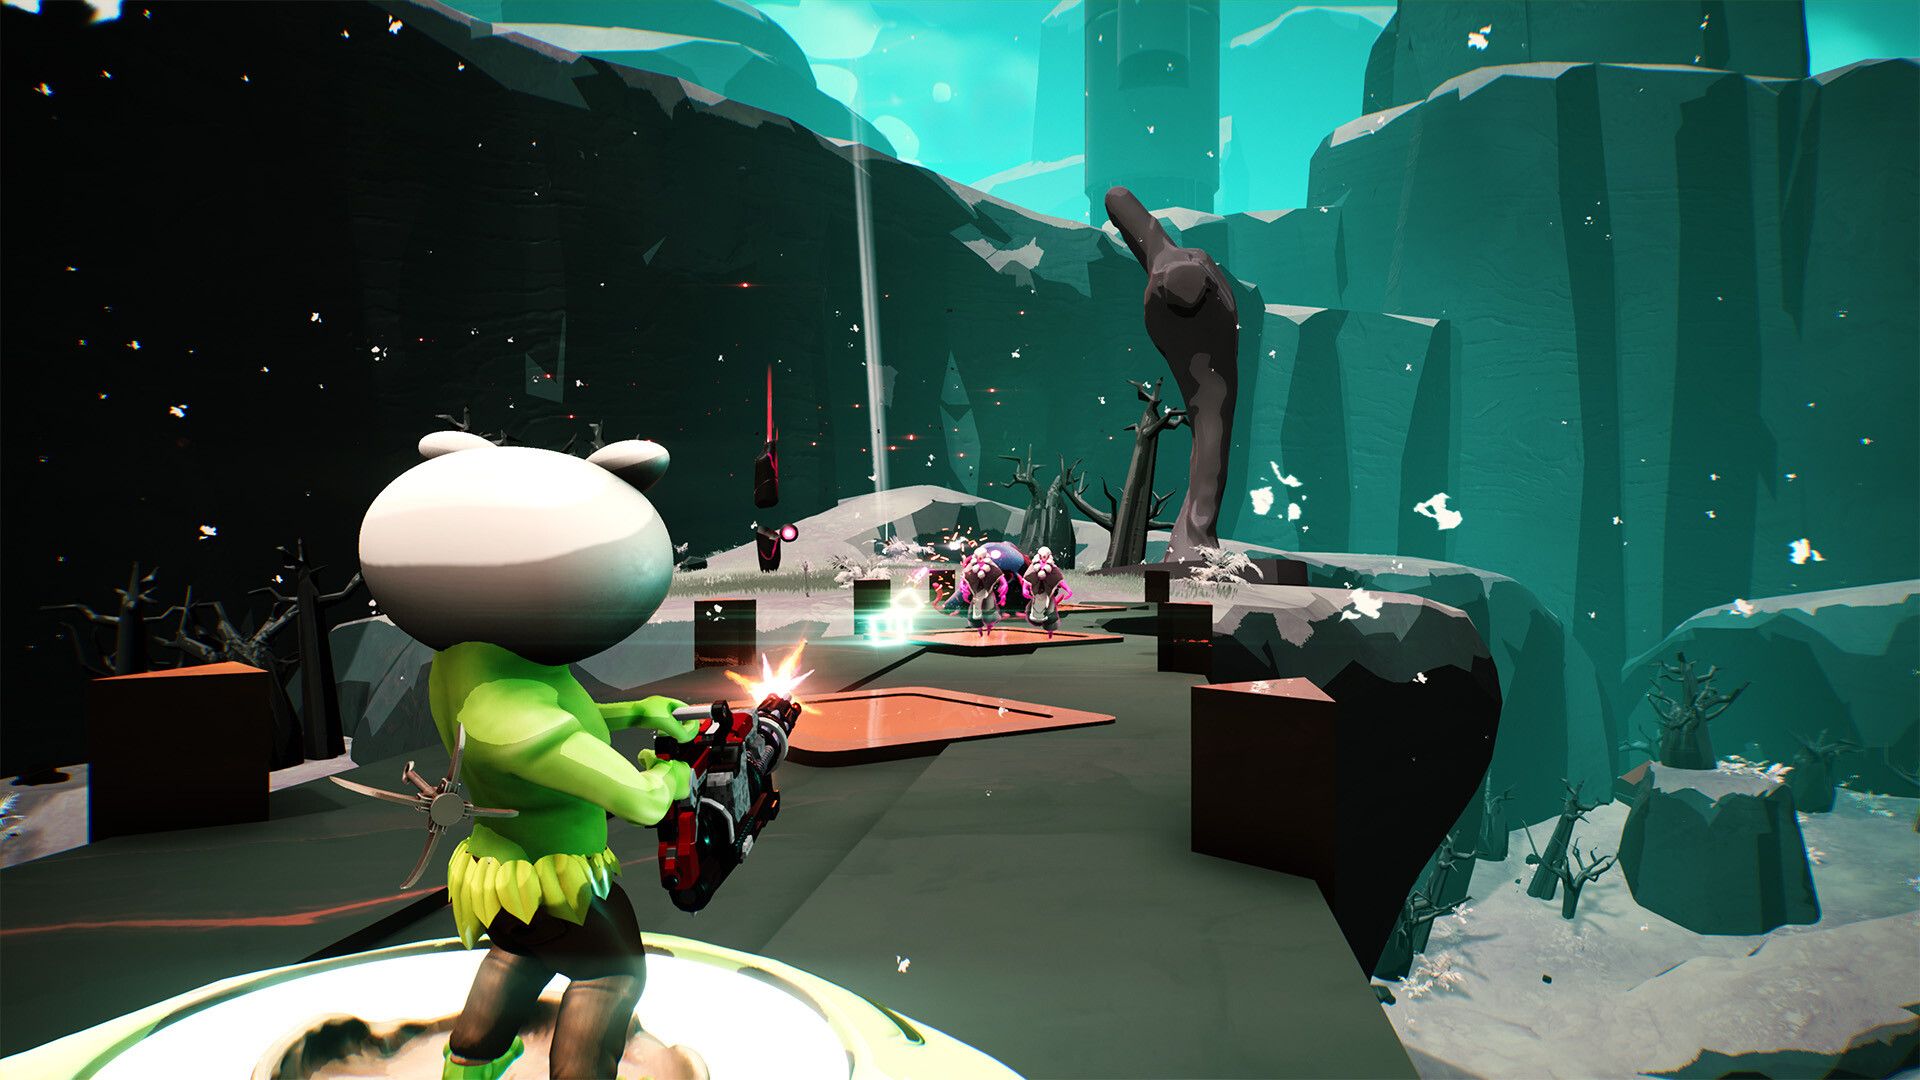 A frog's eye view of battle from the back of a mech in 3d roguelike Shoulders Of Giants